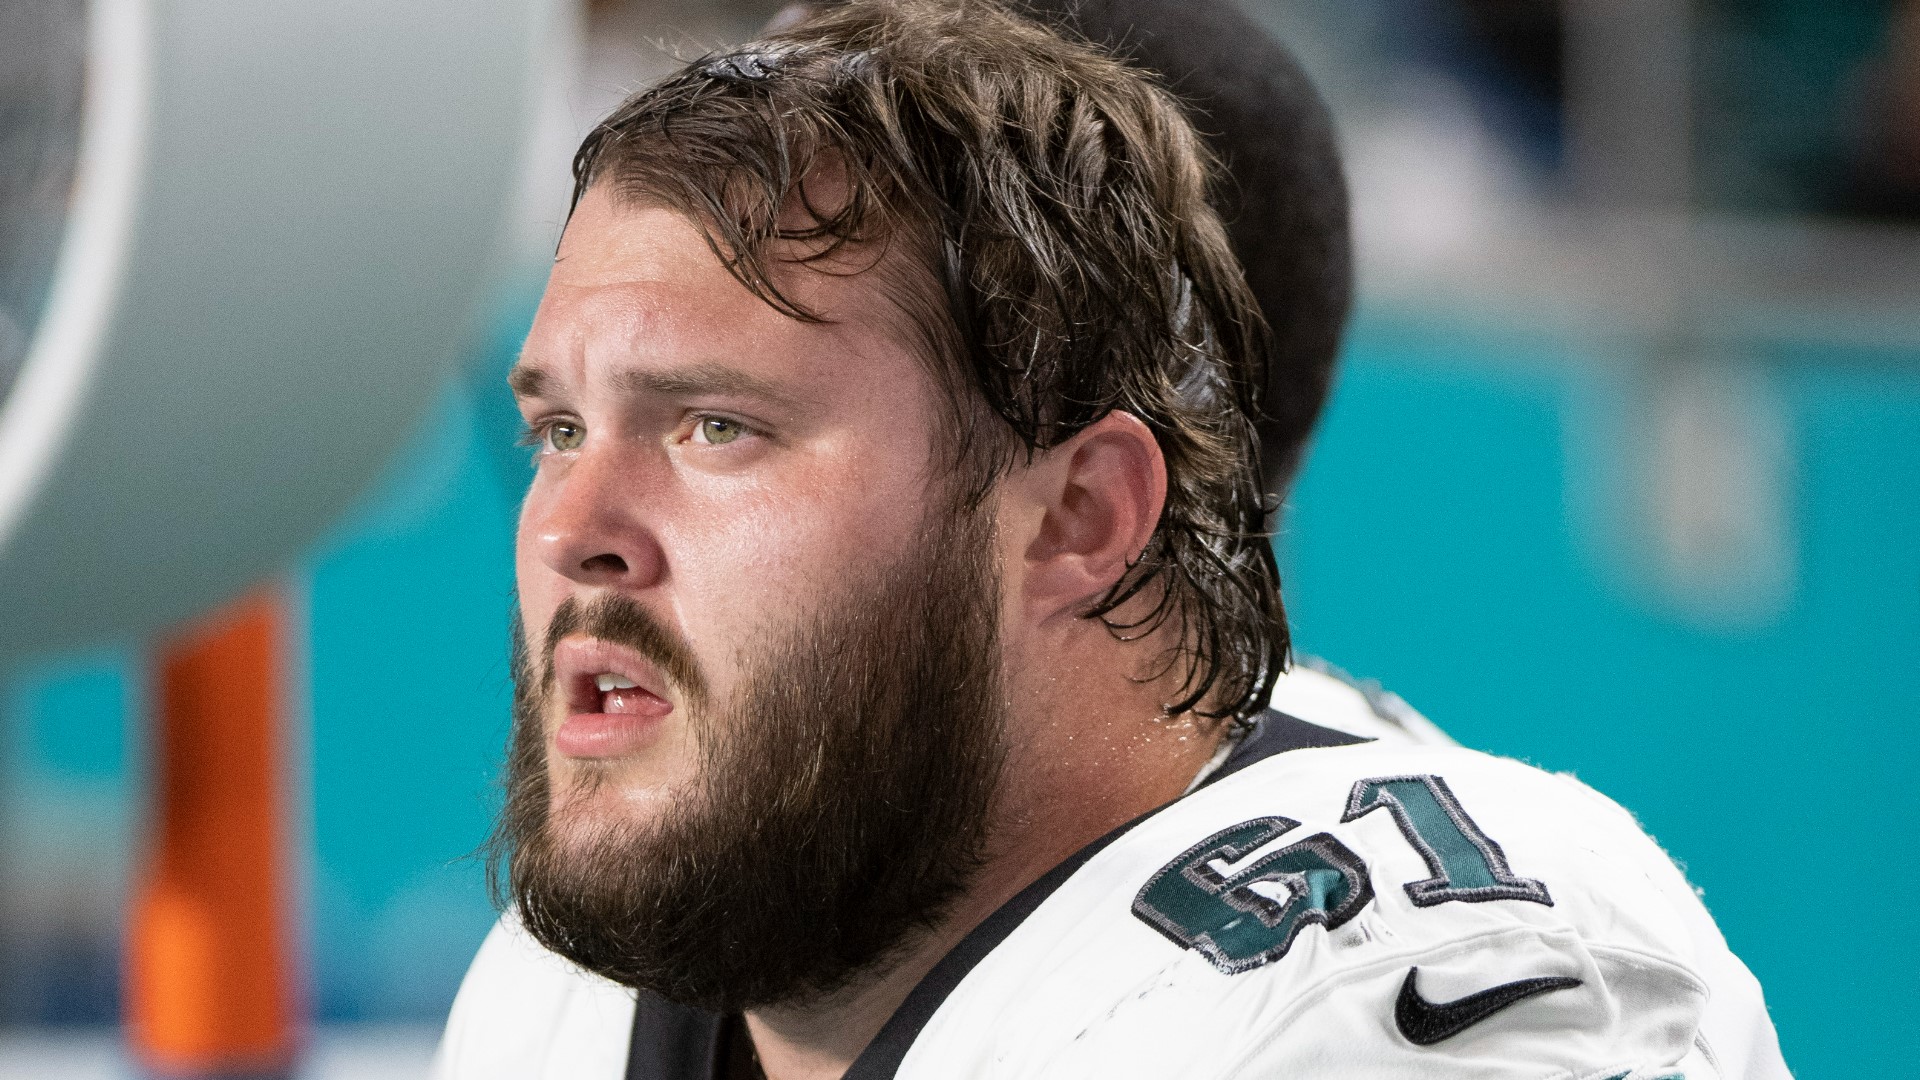 Joshua Sills, a 25-year-old offensive guard with the Philadelphia Eagles from Noble County, was indicted on one count each of rape and kidnapping.